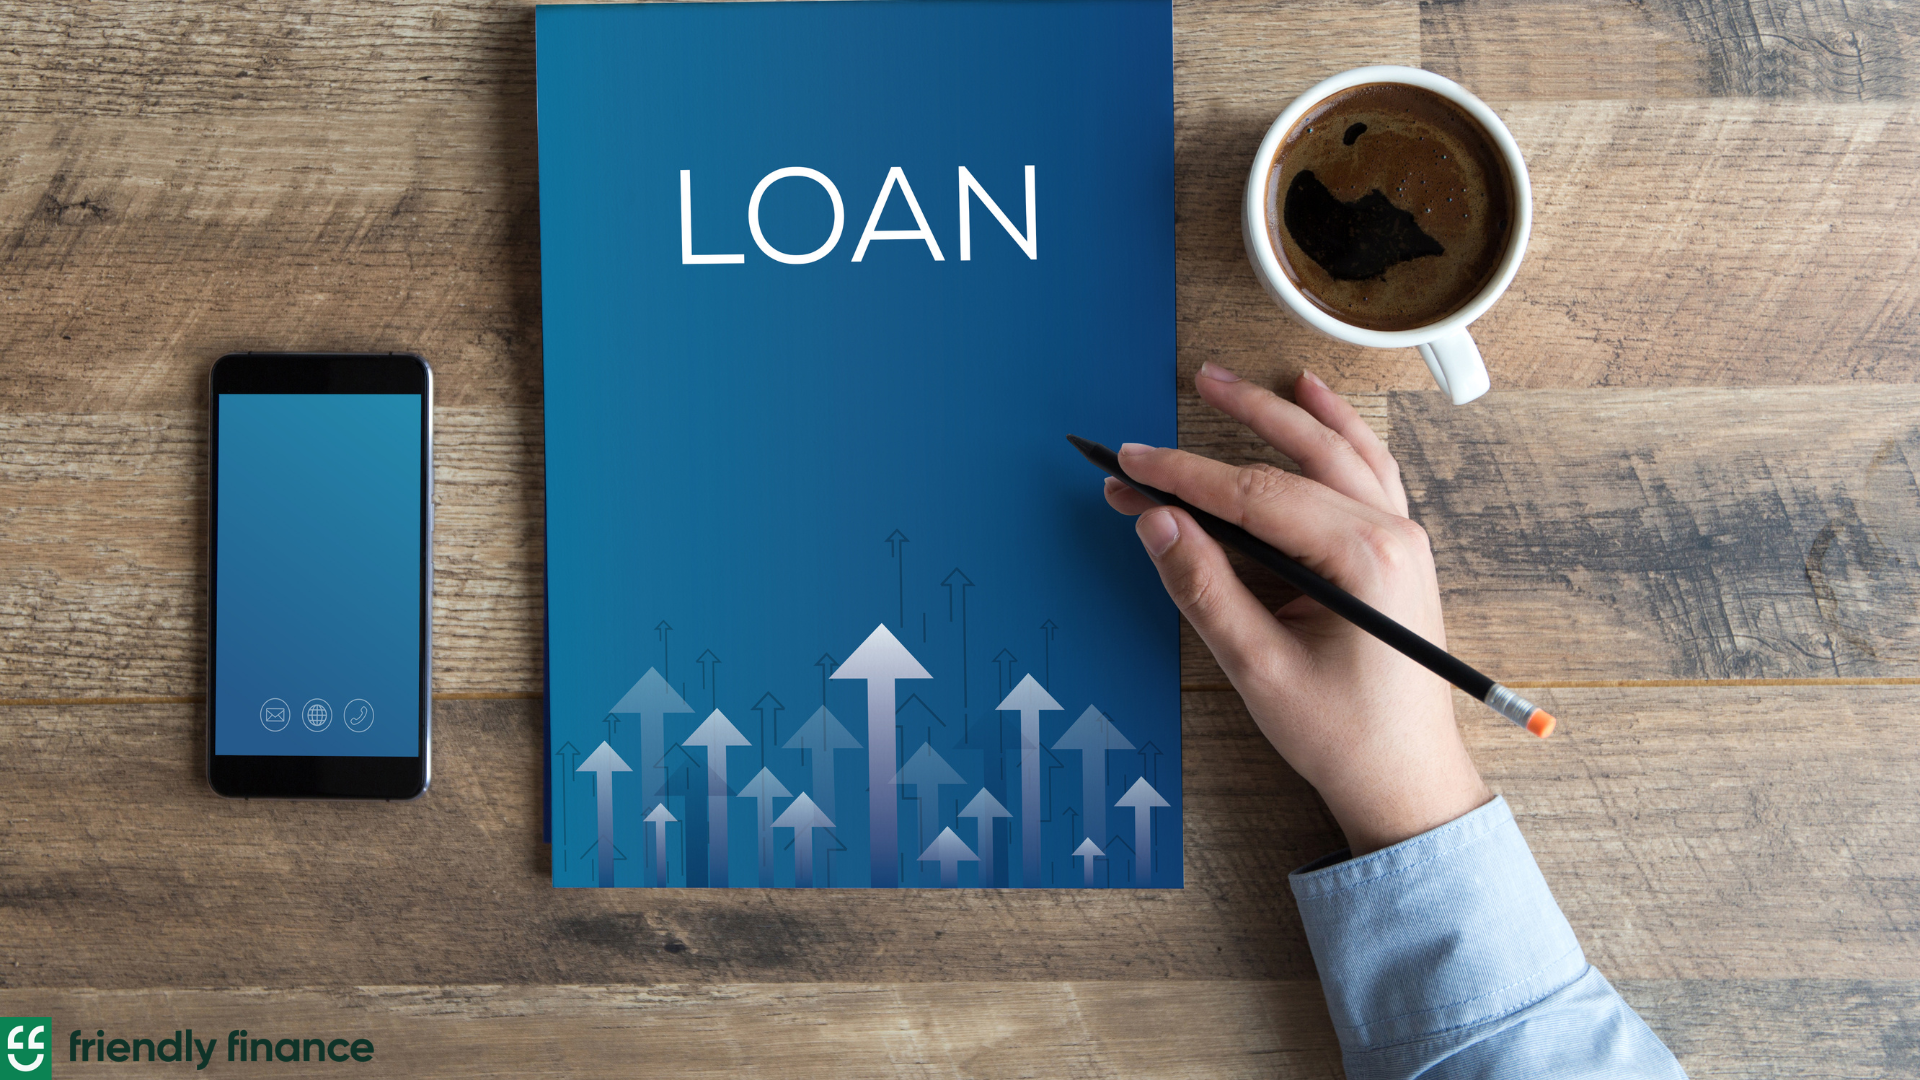 A booklet with "Loan" as title; beside the book on the left is a mobile phone and on the right is a coffee mug. A visible hand of a man holding a pen is placed near the loan booklet